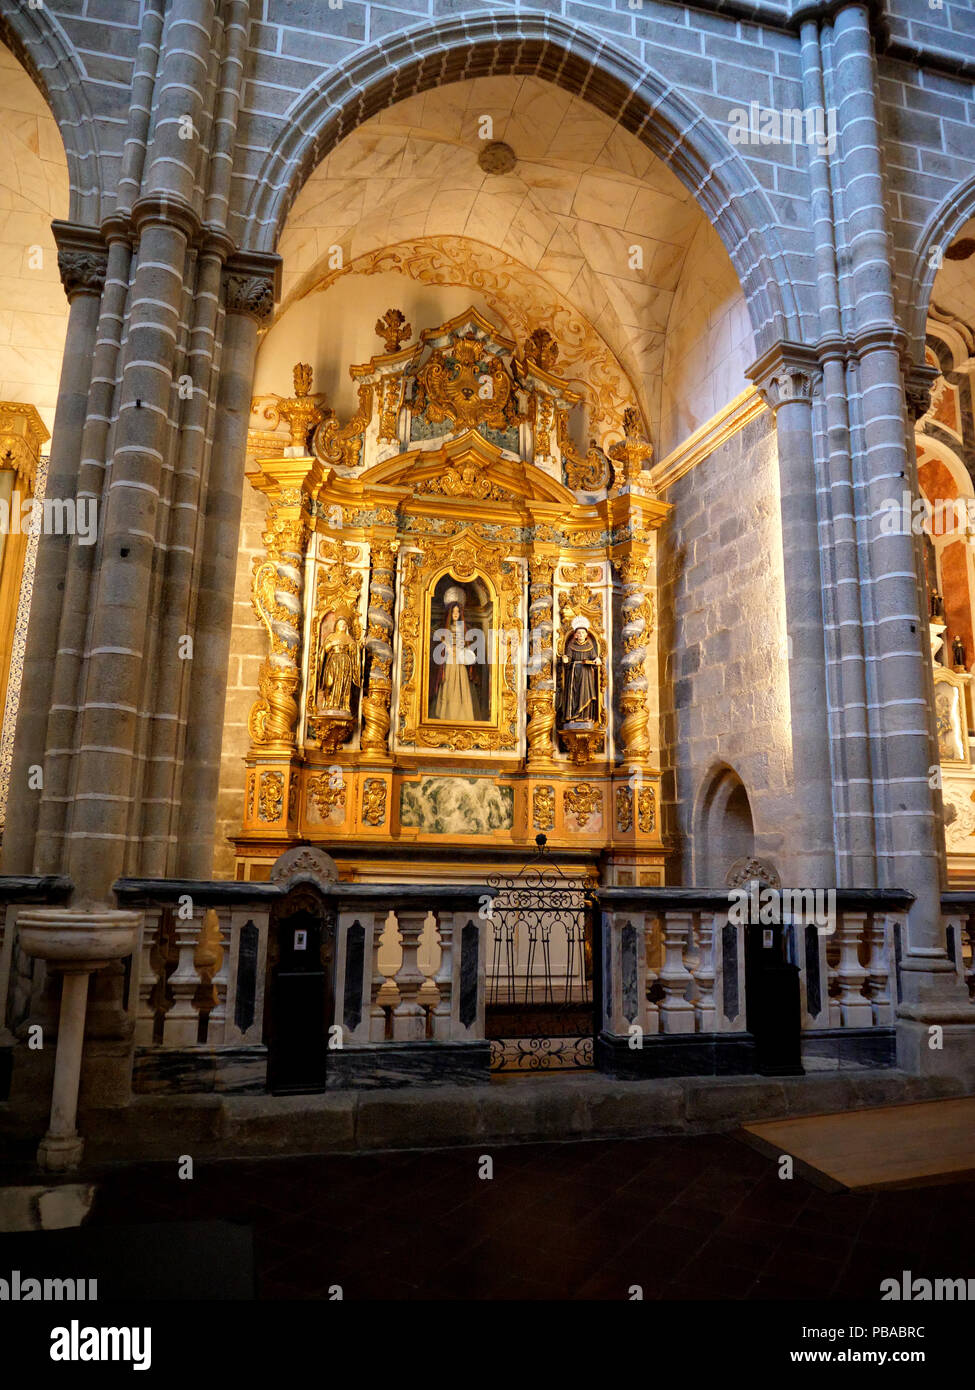 The main interior of the massive 12-century gothic Cathedral of the city of Evora in the Alentejo region of Portugal Stock Photo